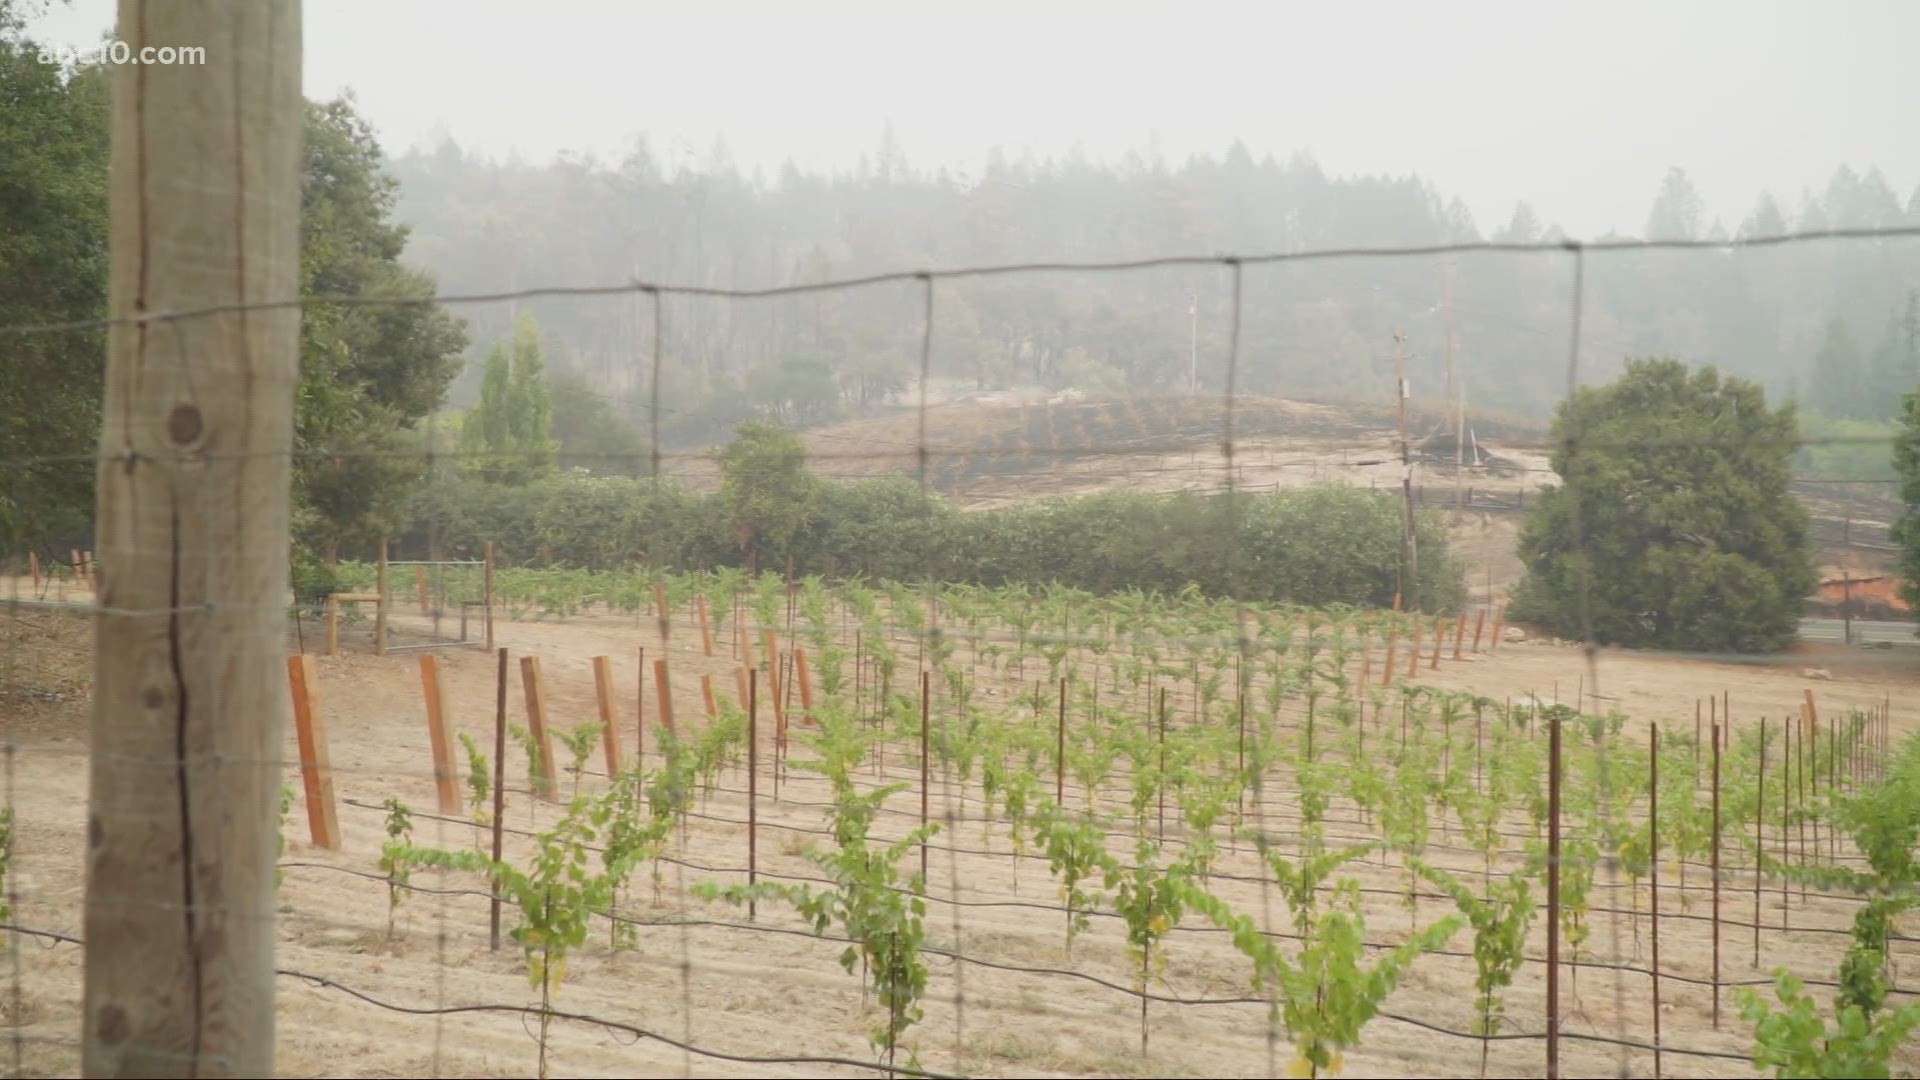 Winemakers working to do what they can to save the wine and grapes already harvested while the Glass Fire devastates Napa and Sonoma counties.